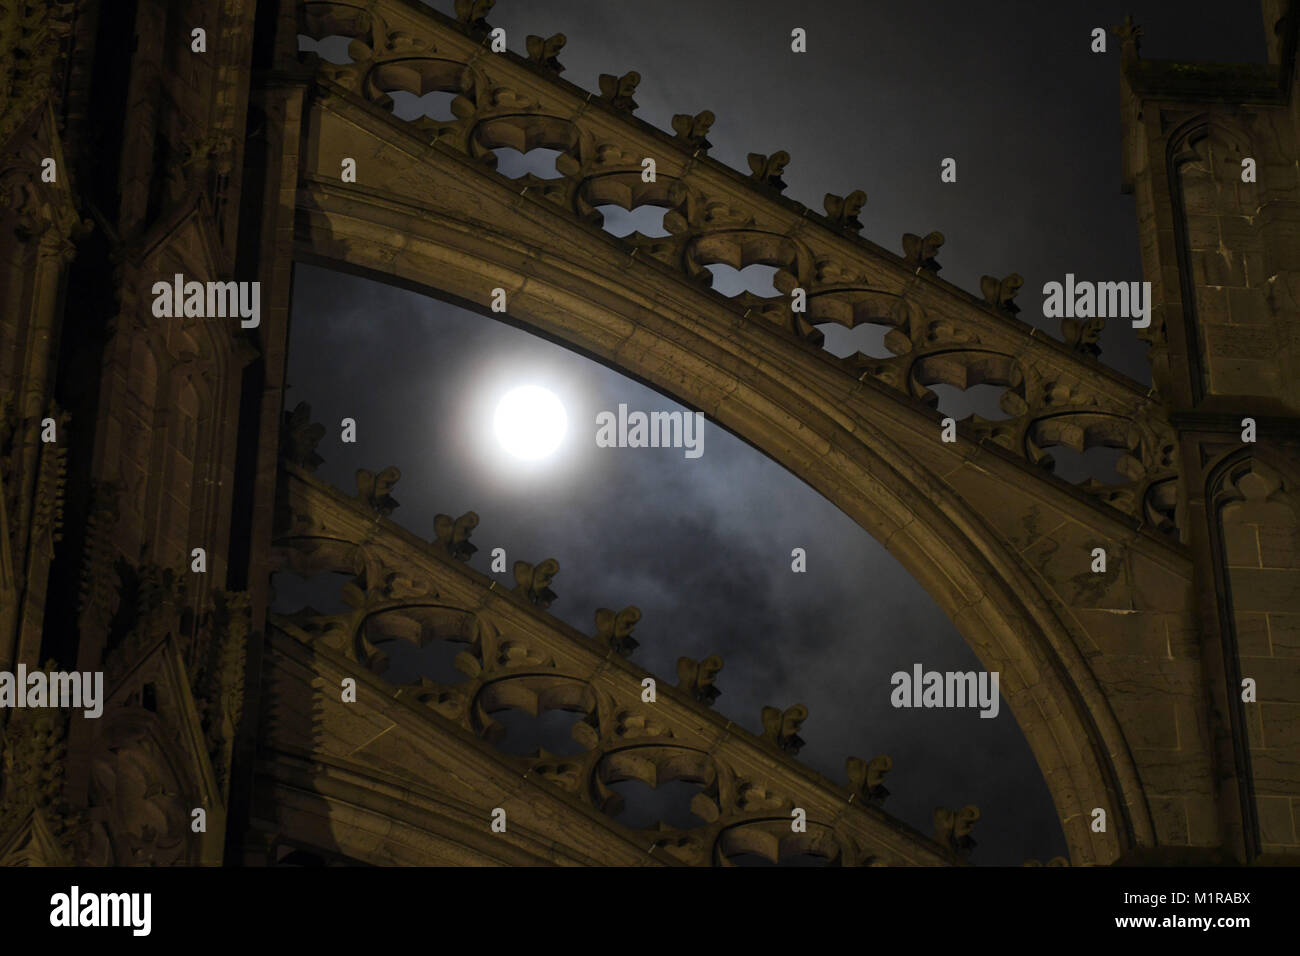 Cologne, Germany. 1st Feb, 2018. The full moon shines bright shortly after midnight, illuminating the Cathedral in Cologne, Germany, 1 February 2018. For the second time in a month the moon has shown its full face in the sky. It is especially close to earth and appears brighter and larger that usual. Credit: Henning Kaiser/dpa/Alamy Live News Stock Photo